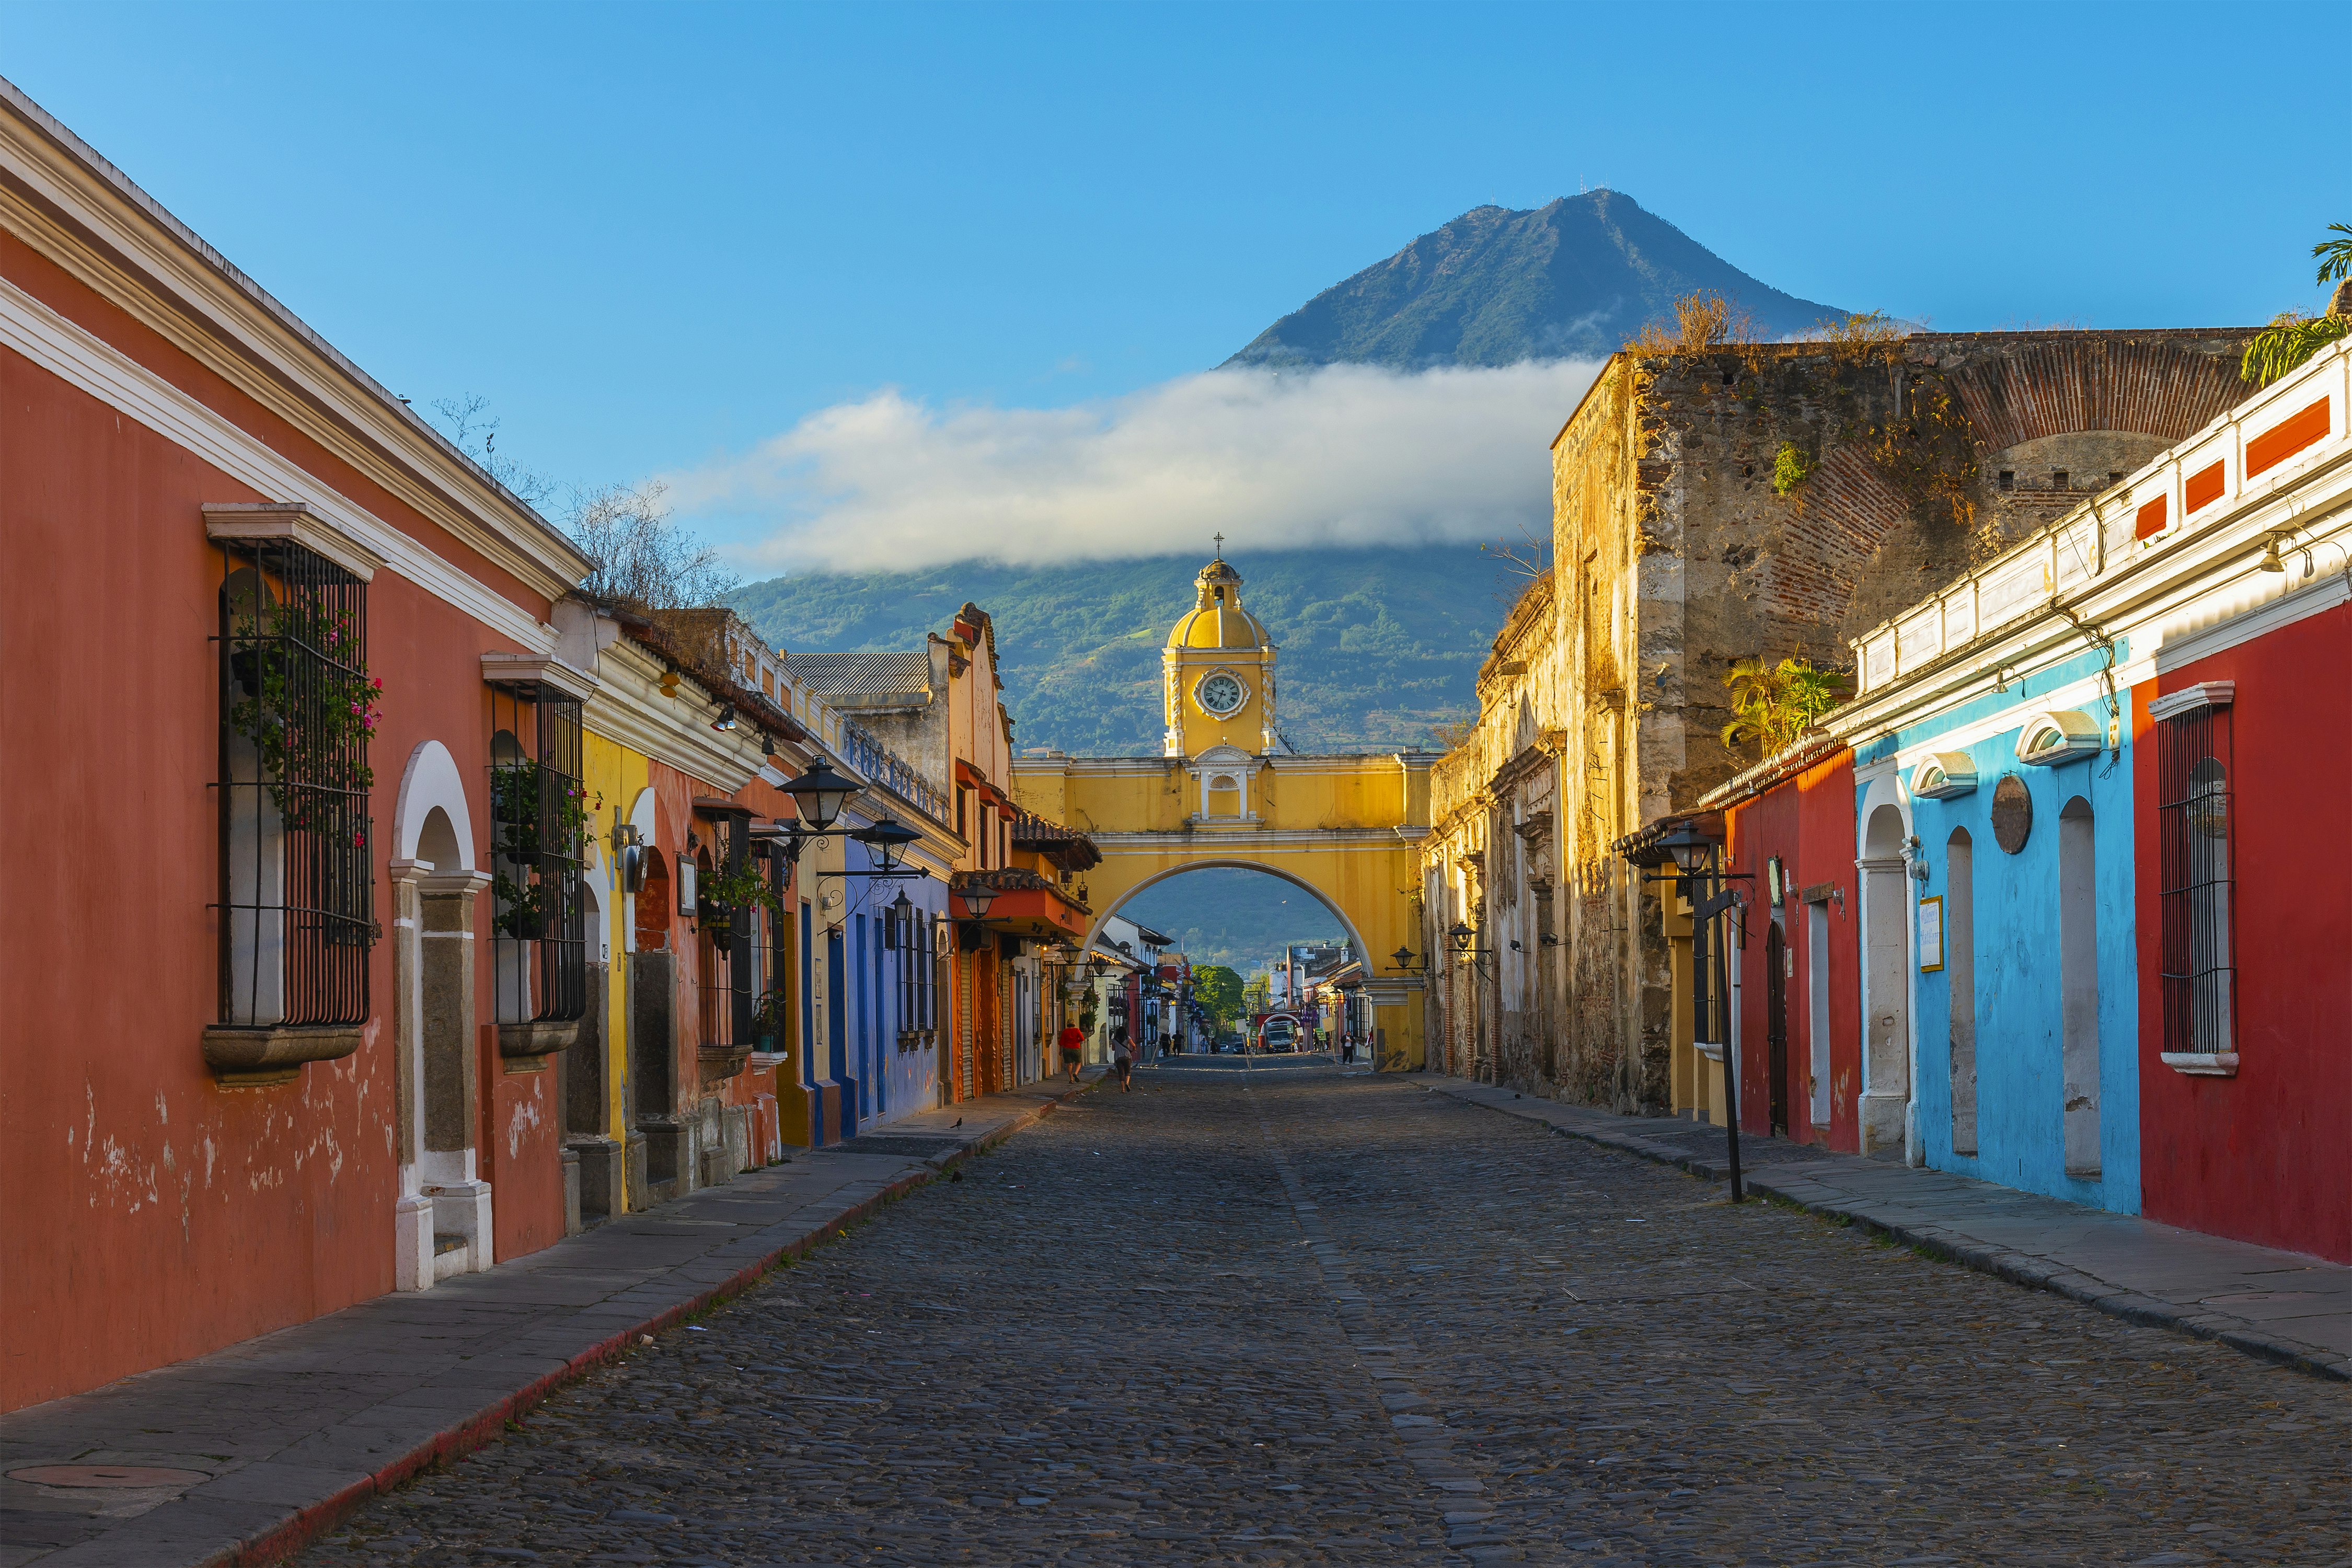 A cobbled stone street framed by colorful, colonial-style buildings lead into downtown Antigua. In the background, is the imposing Mt. Fuego  